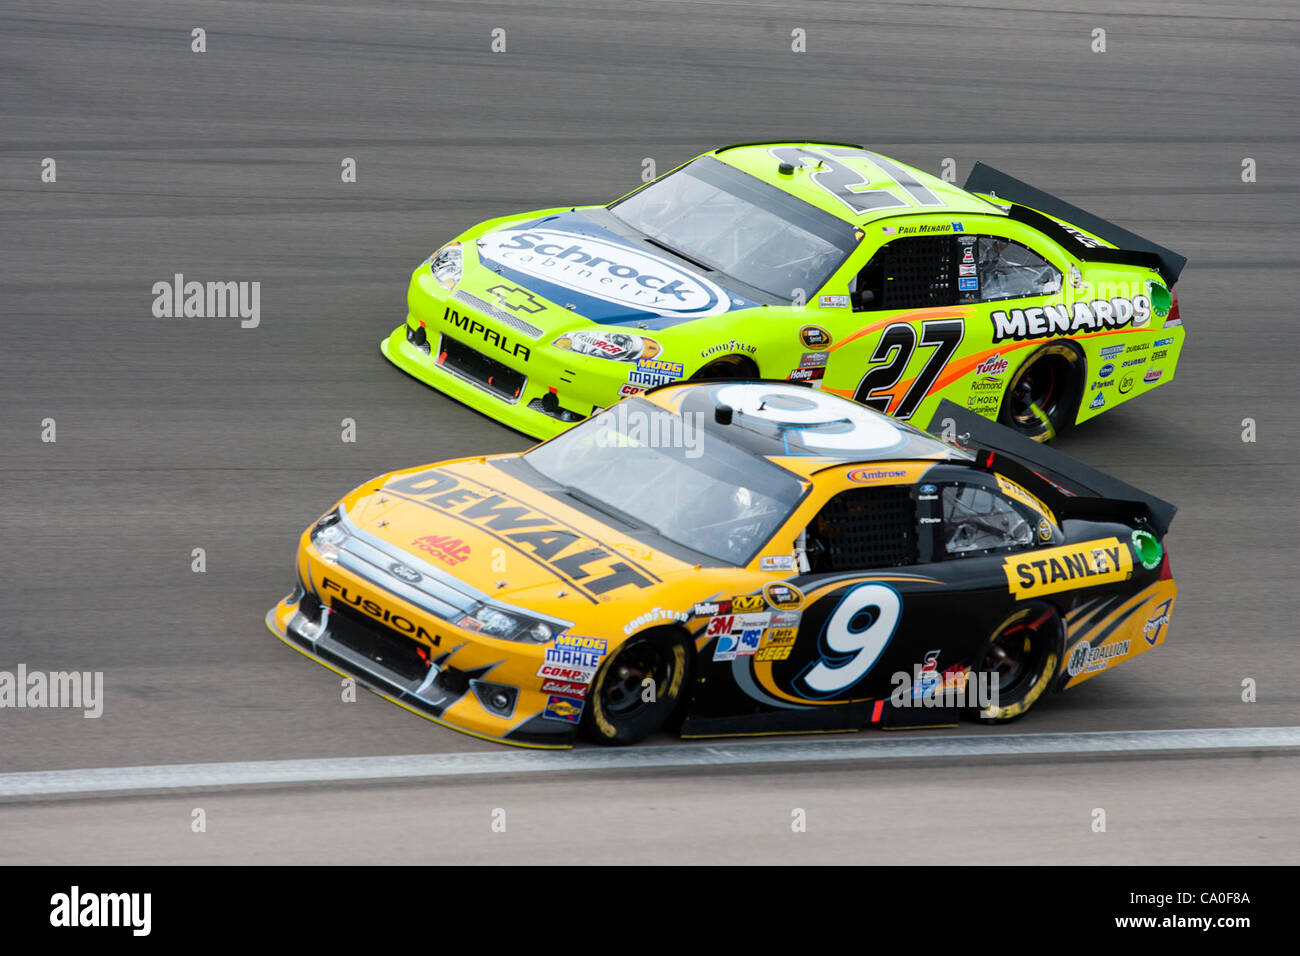 March 11, 2012 - Las Vegas, Nevada, U.S - Marcos Ambrose, driver of the #9 Dewalt Ford Fusion, keeps down on the line to avoid a crash while Paul Menard, driver of the #27 Schrock / Menards Chevrolet Impala, tries to keep off of him during the exciting racing action at the NASCAR Sprint Cup Series K Stock Photo